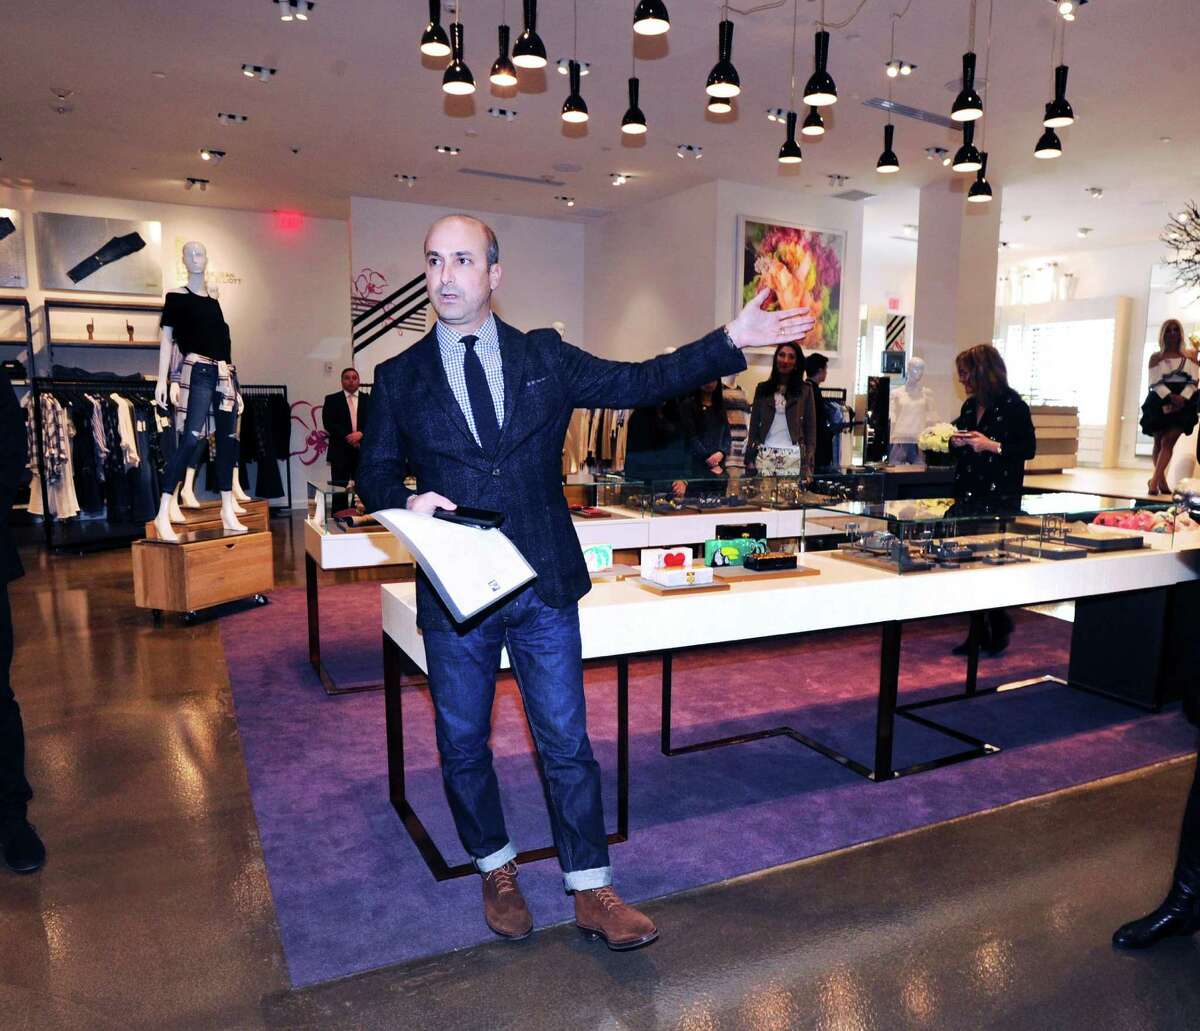 Joe Gambino, vice president and general manager of The Saks Shops at Greenwich, during the celebration and media tour of the new Saks Fifth Avenue specialty store, The Collective, at 200 Greenwich Ave., Greenwich, Conn., Wednesday night, Feb. 1, 2017. The new specialty store format is a 2-level 14,000 square foot store and according to Sak's executives is part of a rebranding of the company's comtemporary retail business. Saks Fifth Avenue is a luxury retailer.